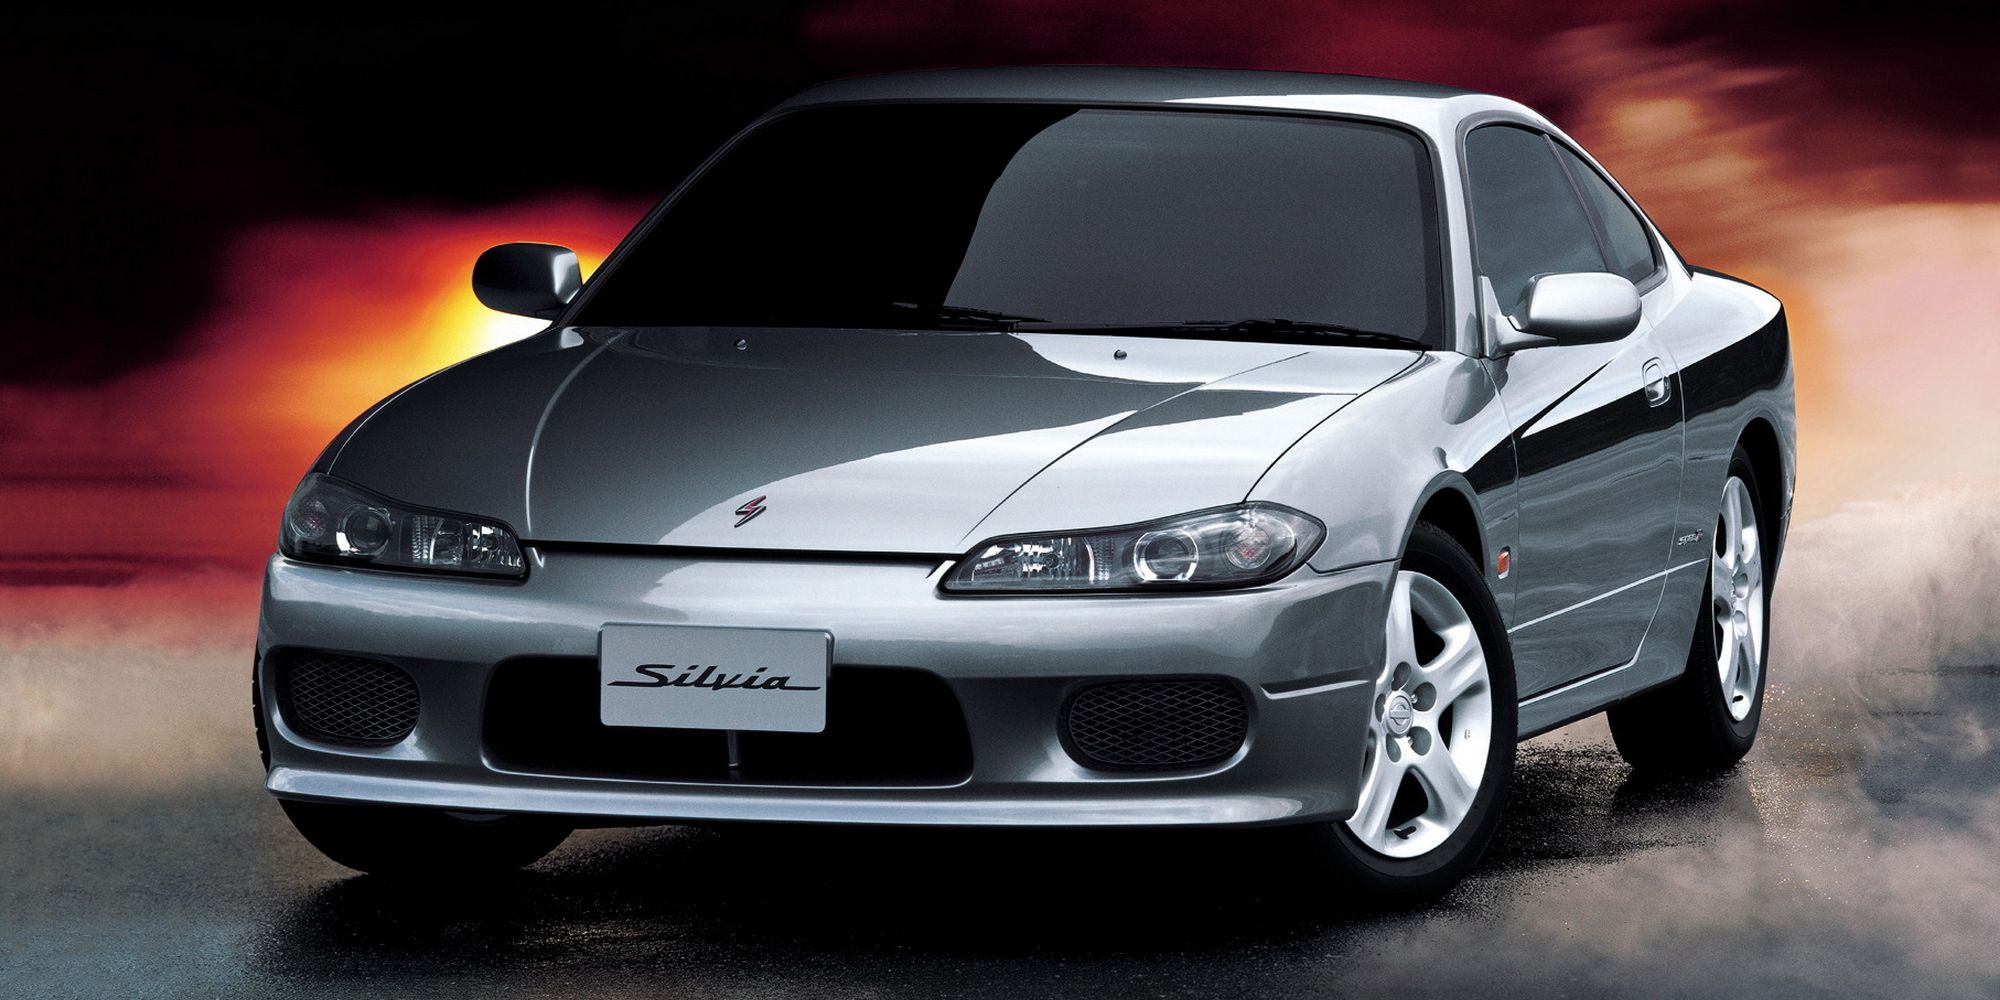 S15 Silvia front